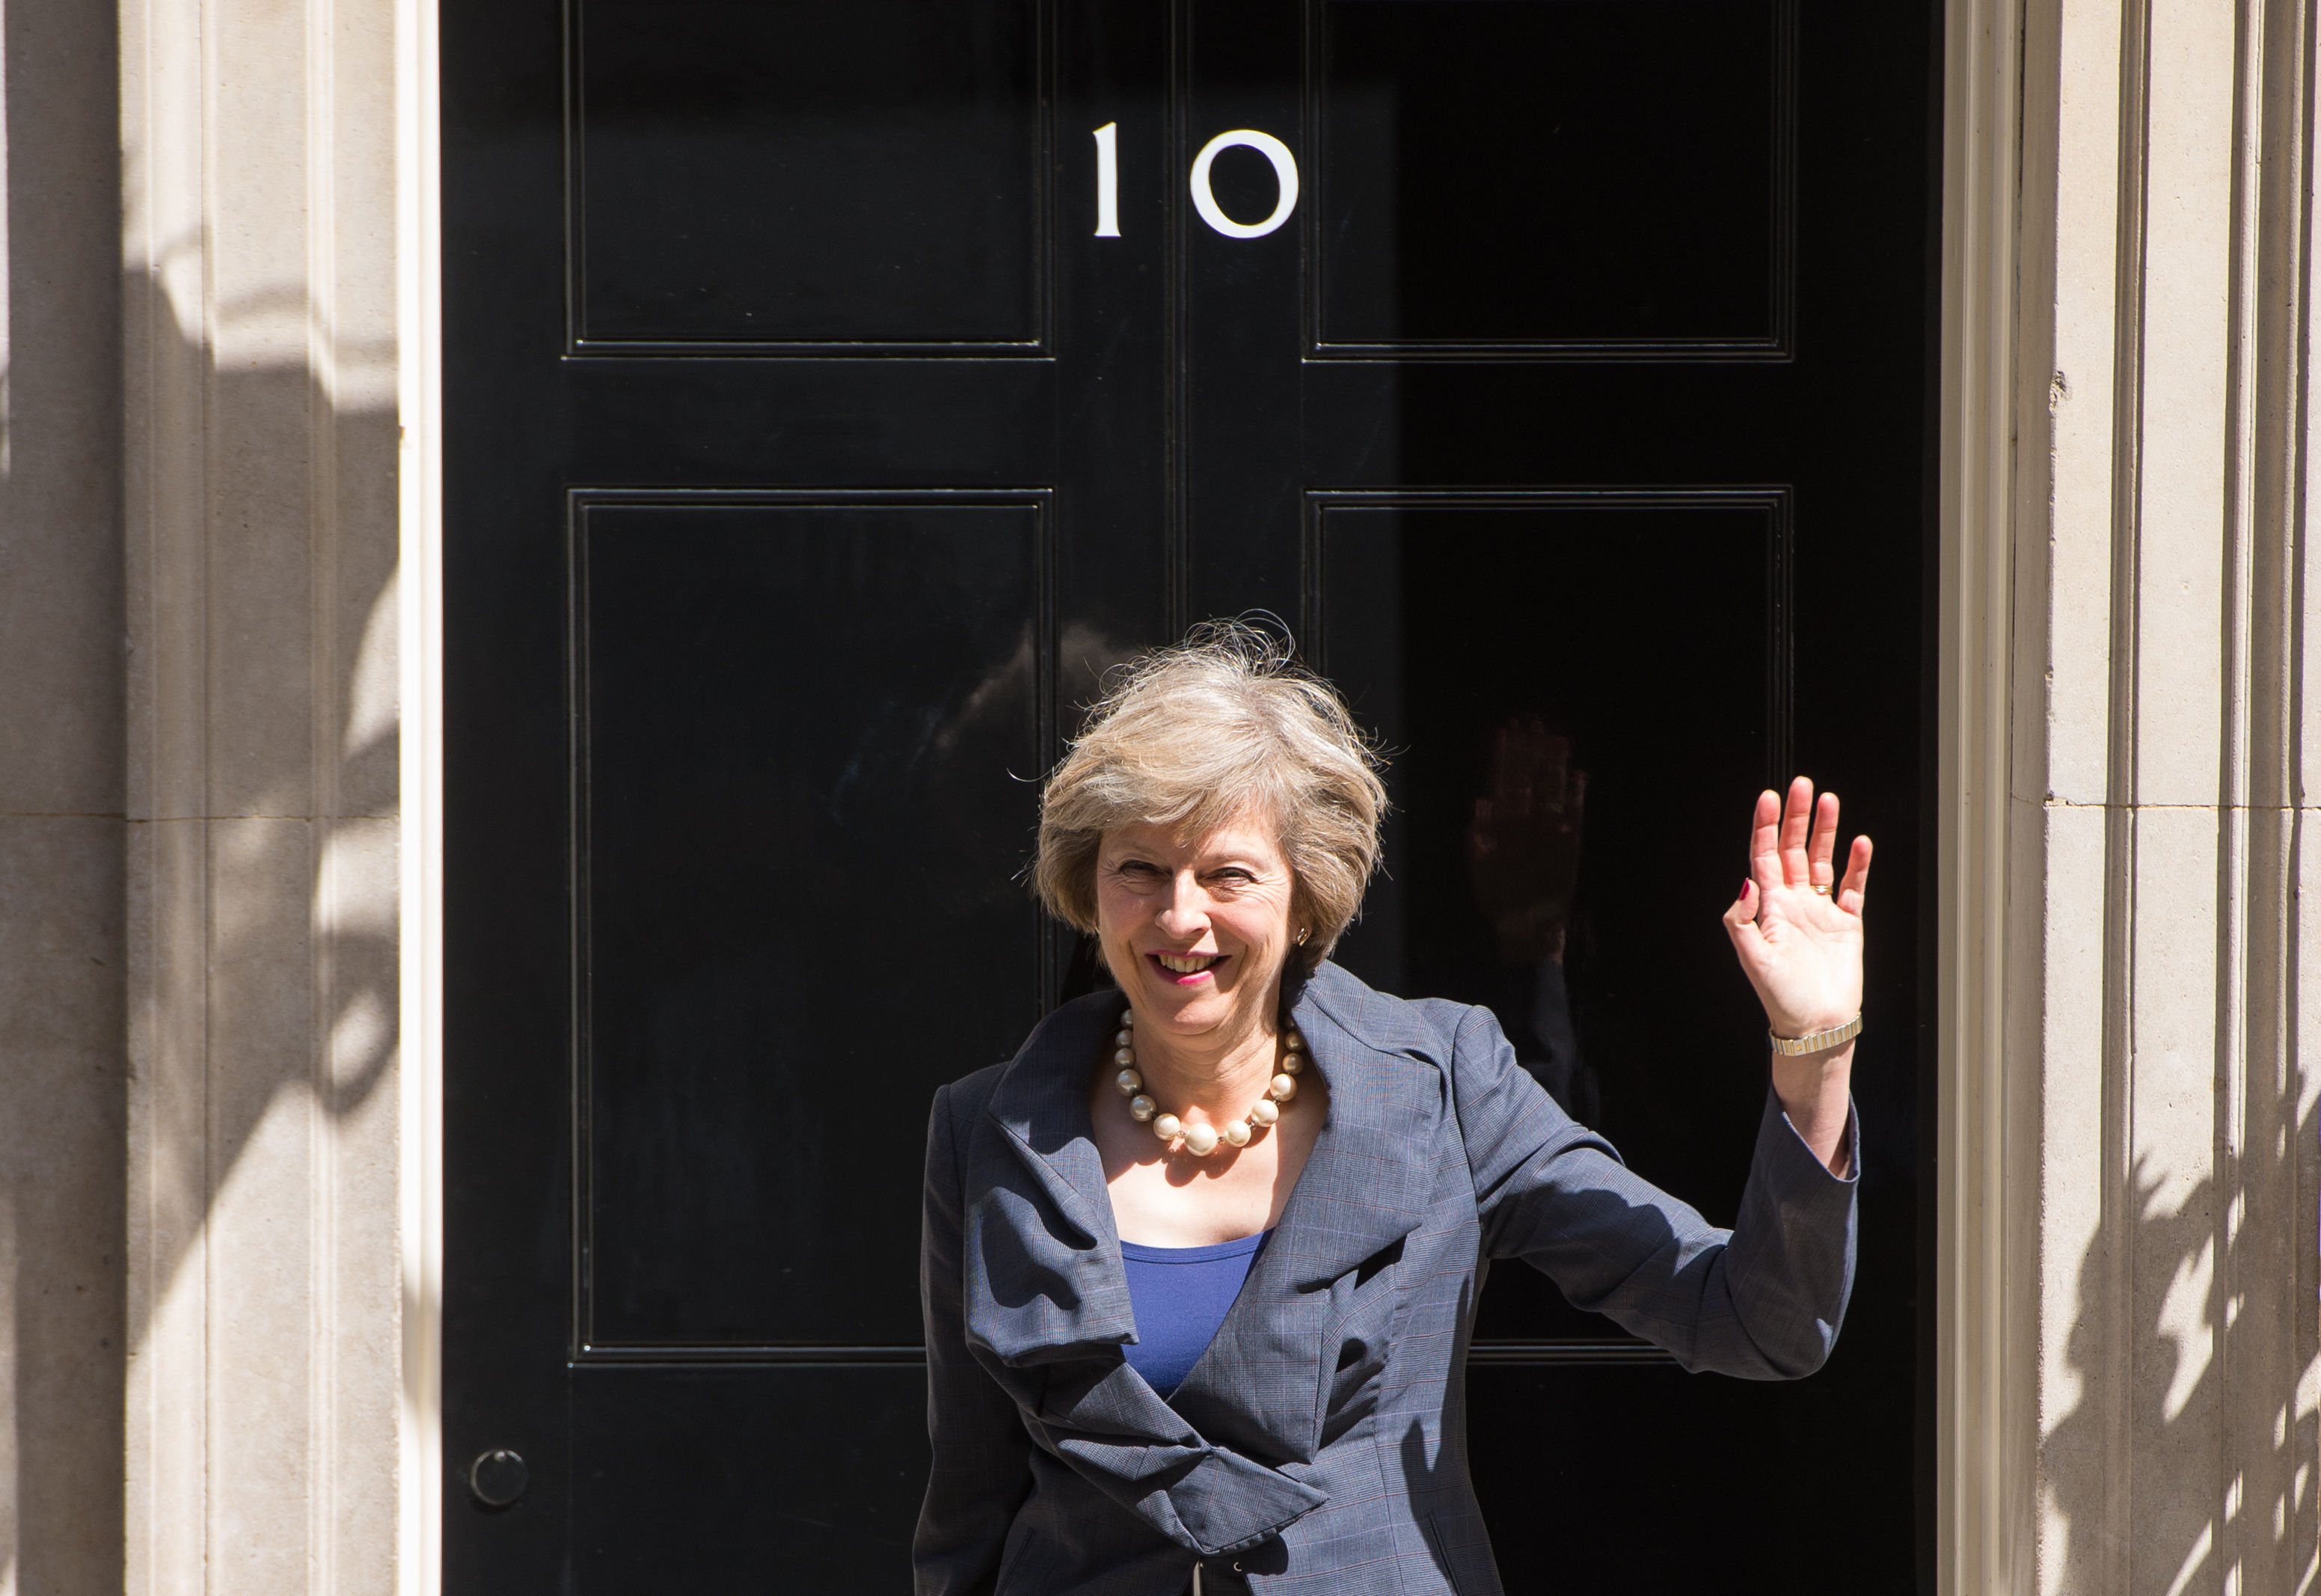 Theresa May outside Number 10 Downing Street